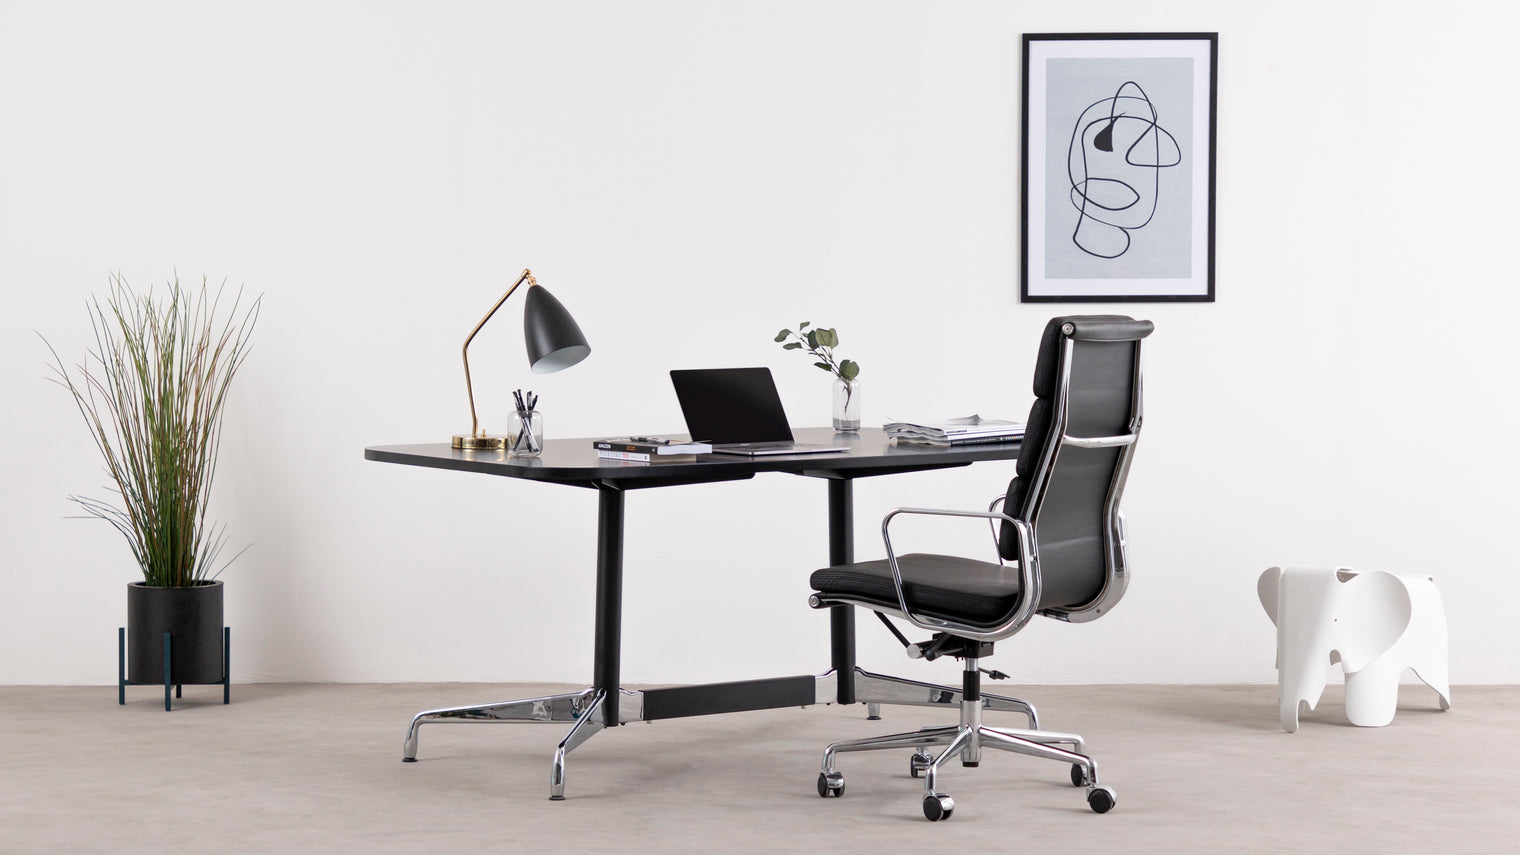 Beyond the board room| The Desk finds its place in various settings. Use it as a stylish dining table for gatherings with family and friends or as a commanding centerpiece in your workspace to inspire creativity and collaboration.
